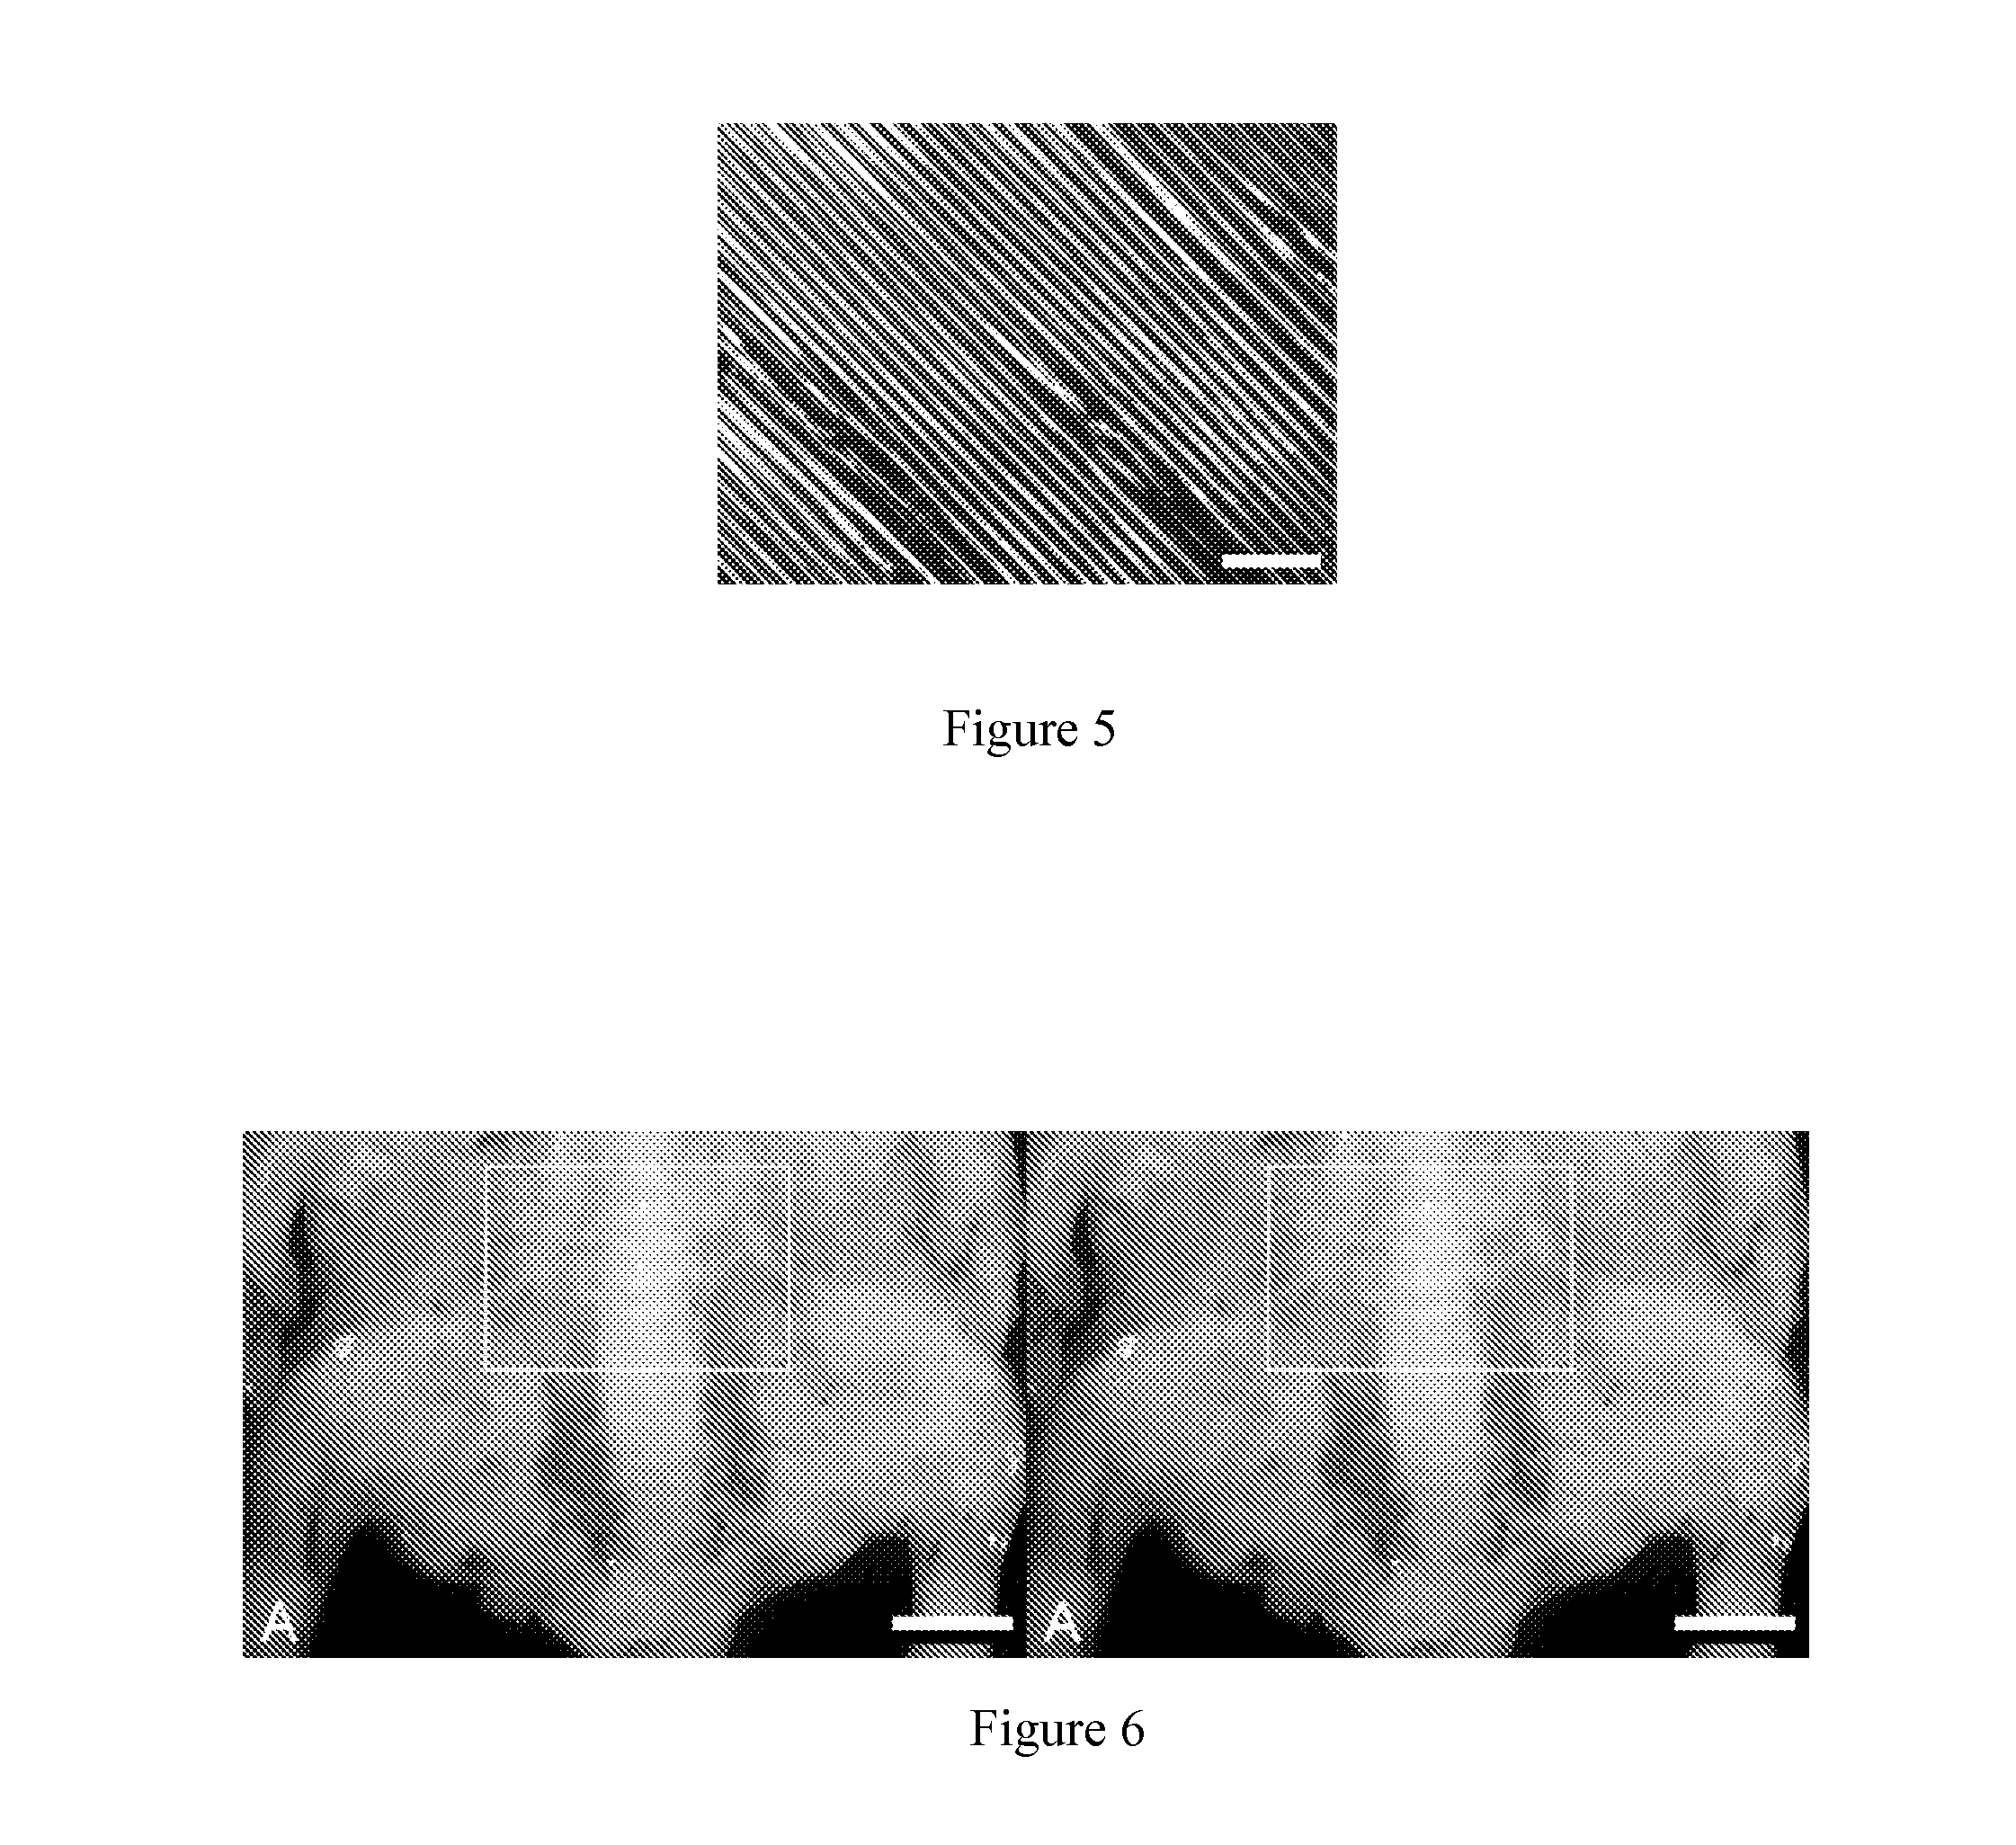 Porous polymer scaffolds for neural tissue engineering and methods of producing the same